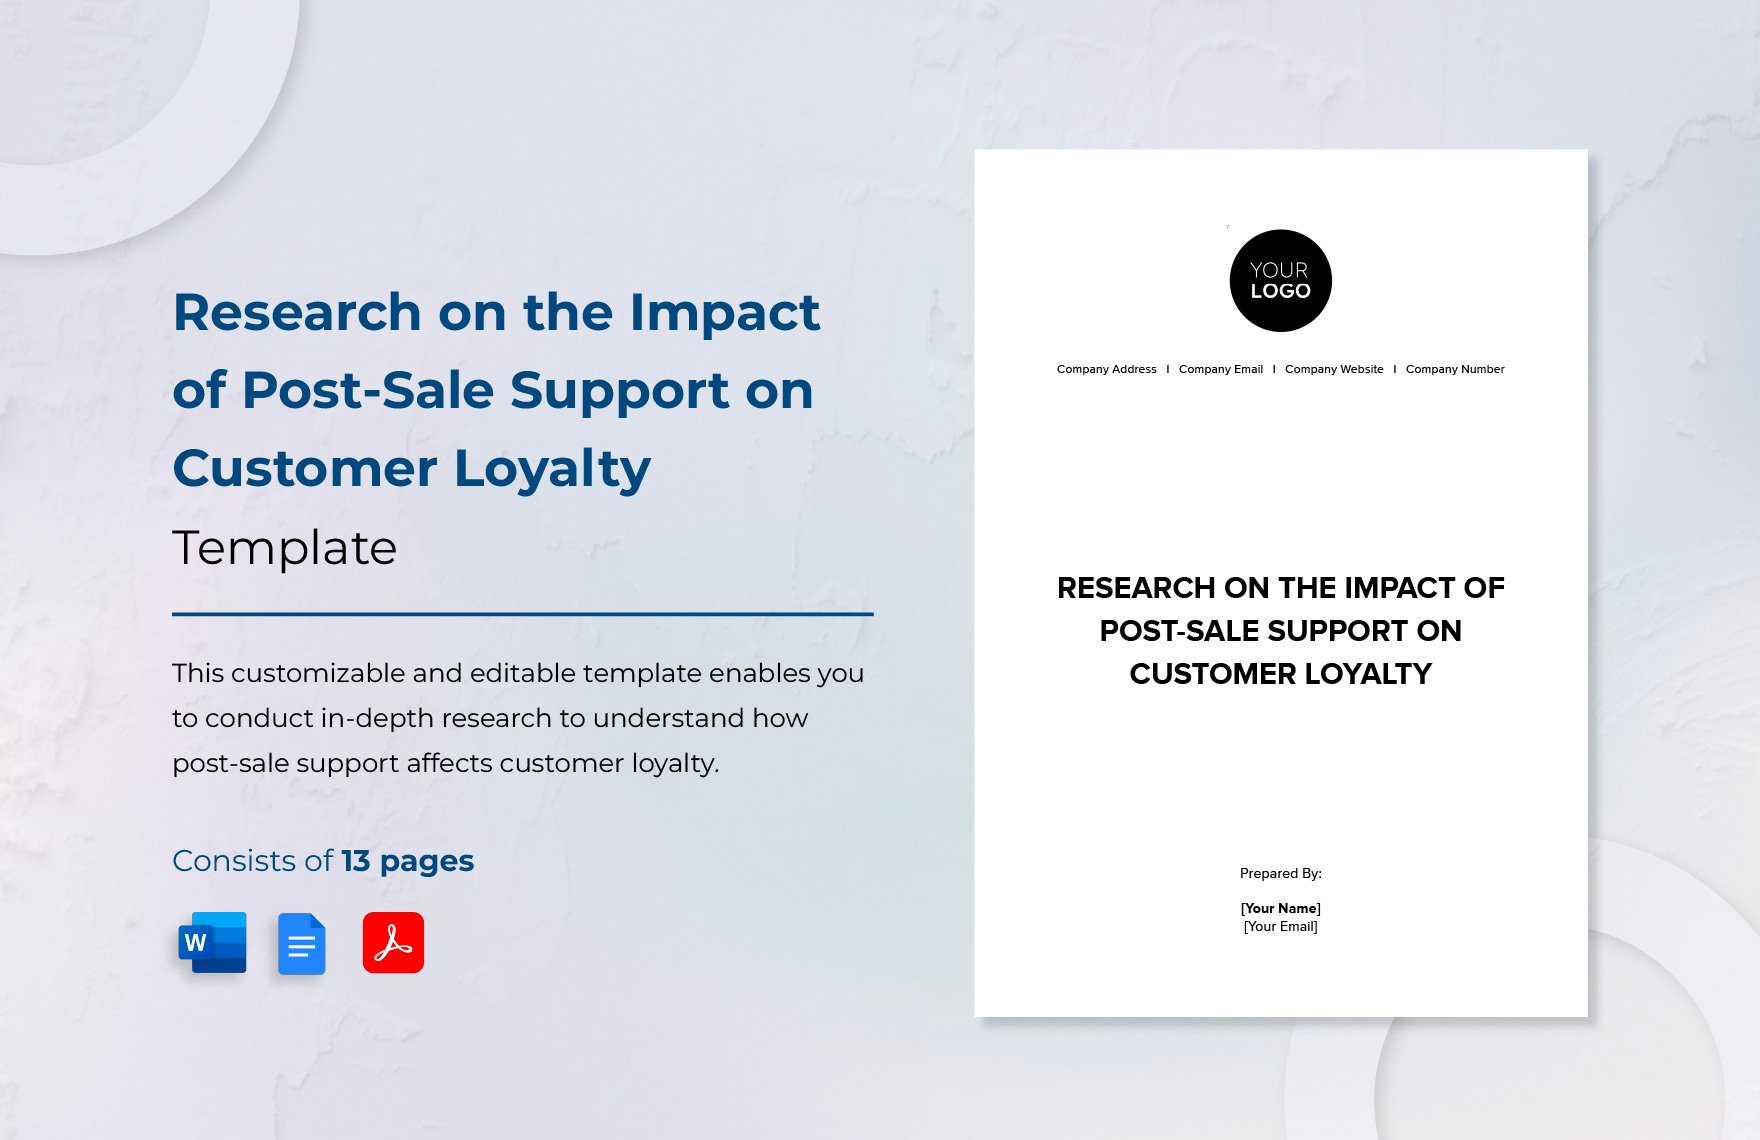 Research on the Impact of Post-Sale Support on Customer Loyalty Template